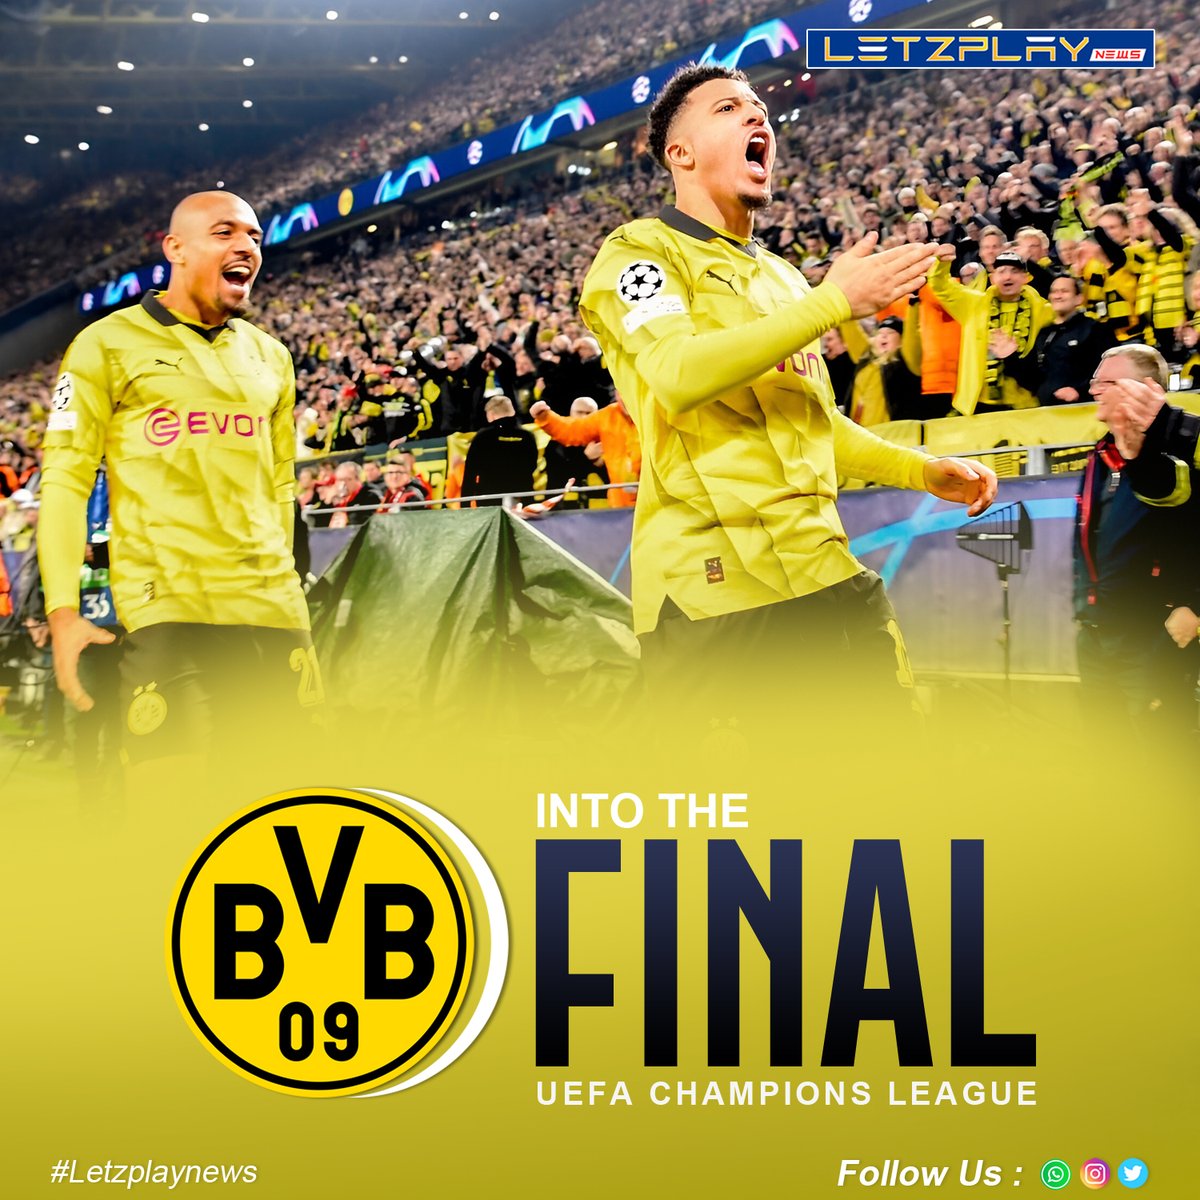 🚀 Borussia Dortmund books their ticket to the Champions League final, marking their third appearance in club history!💛🖤🆑 

The stage is set, can they clinch victory this time?⚽ 

#BVB #UCL #FootballDreams #football #news #uefachampionsleague #UEFA #footballer #footballplayer